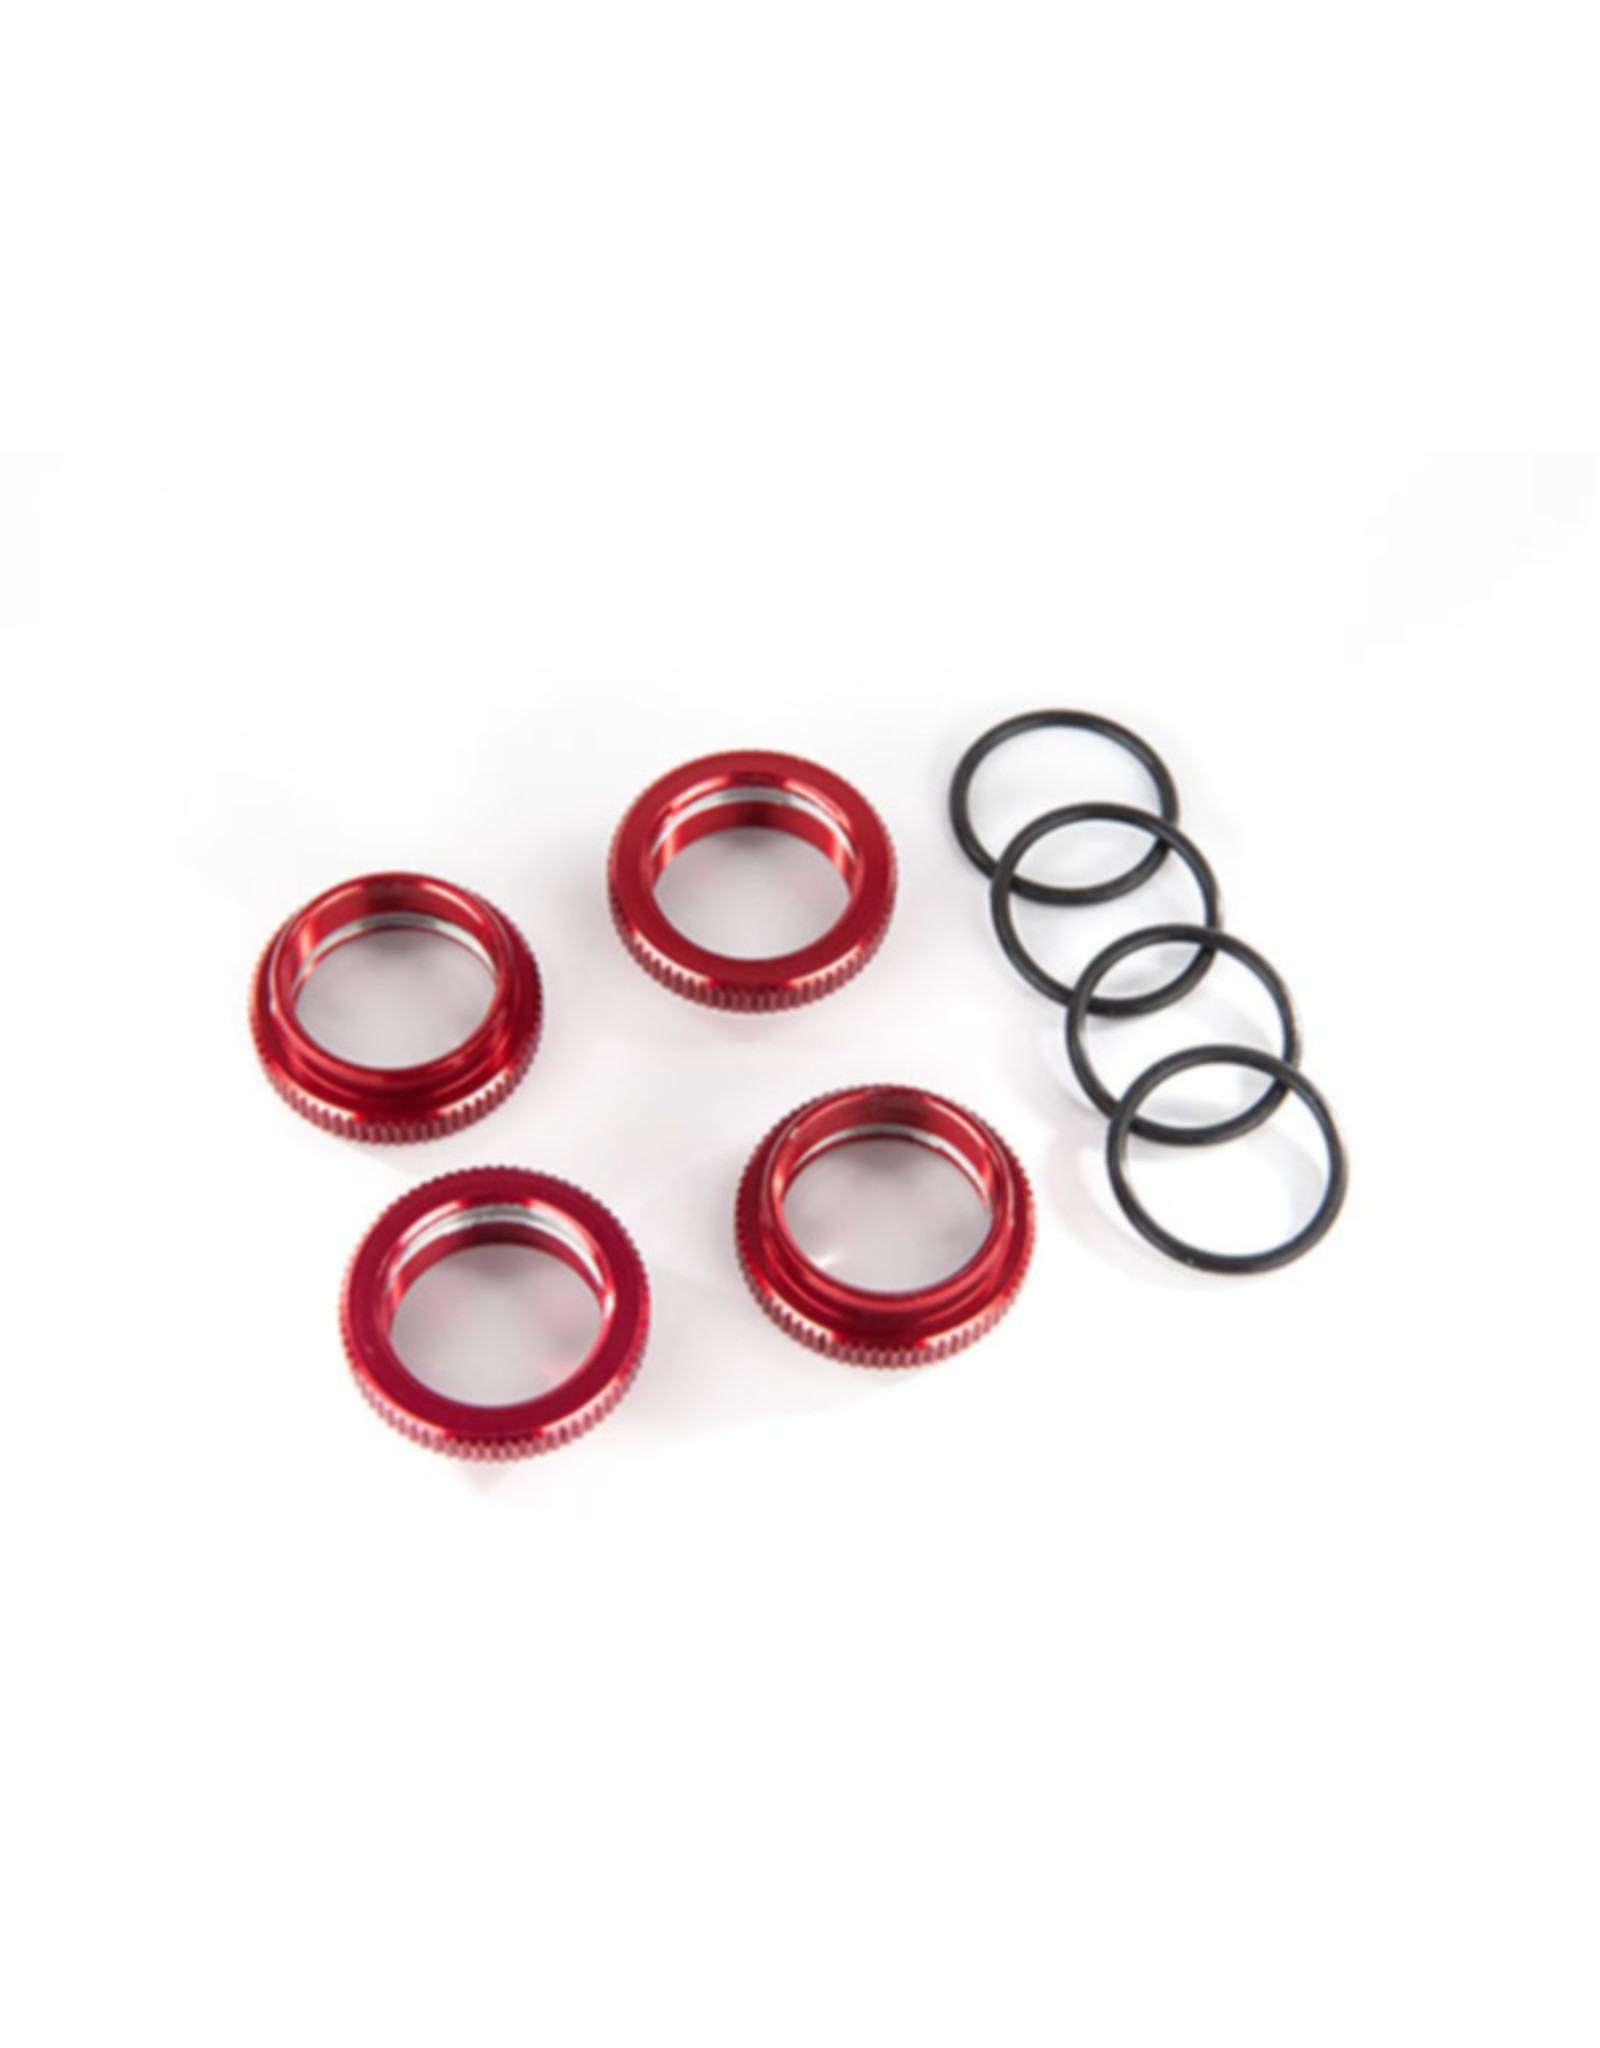 Traxxas TRA8968R - Spring retainer (adjuster), red-anodized aluminum